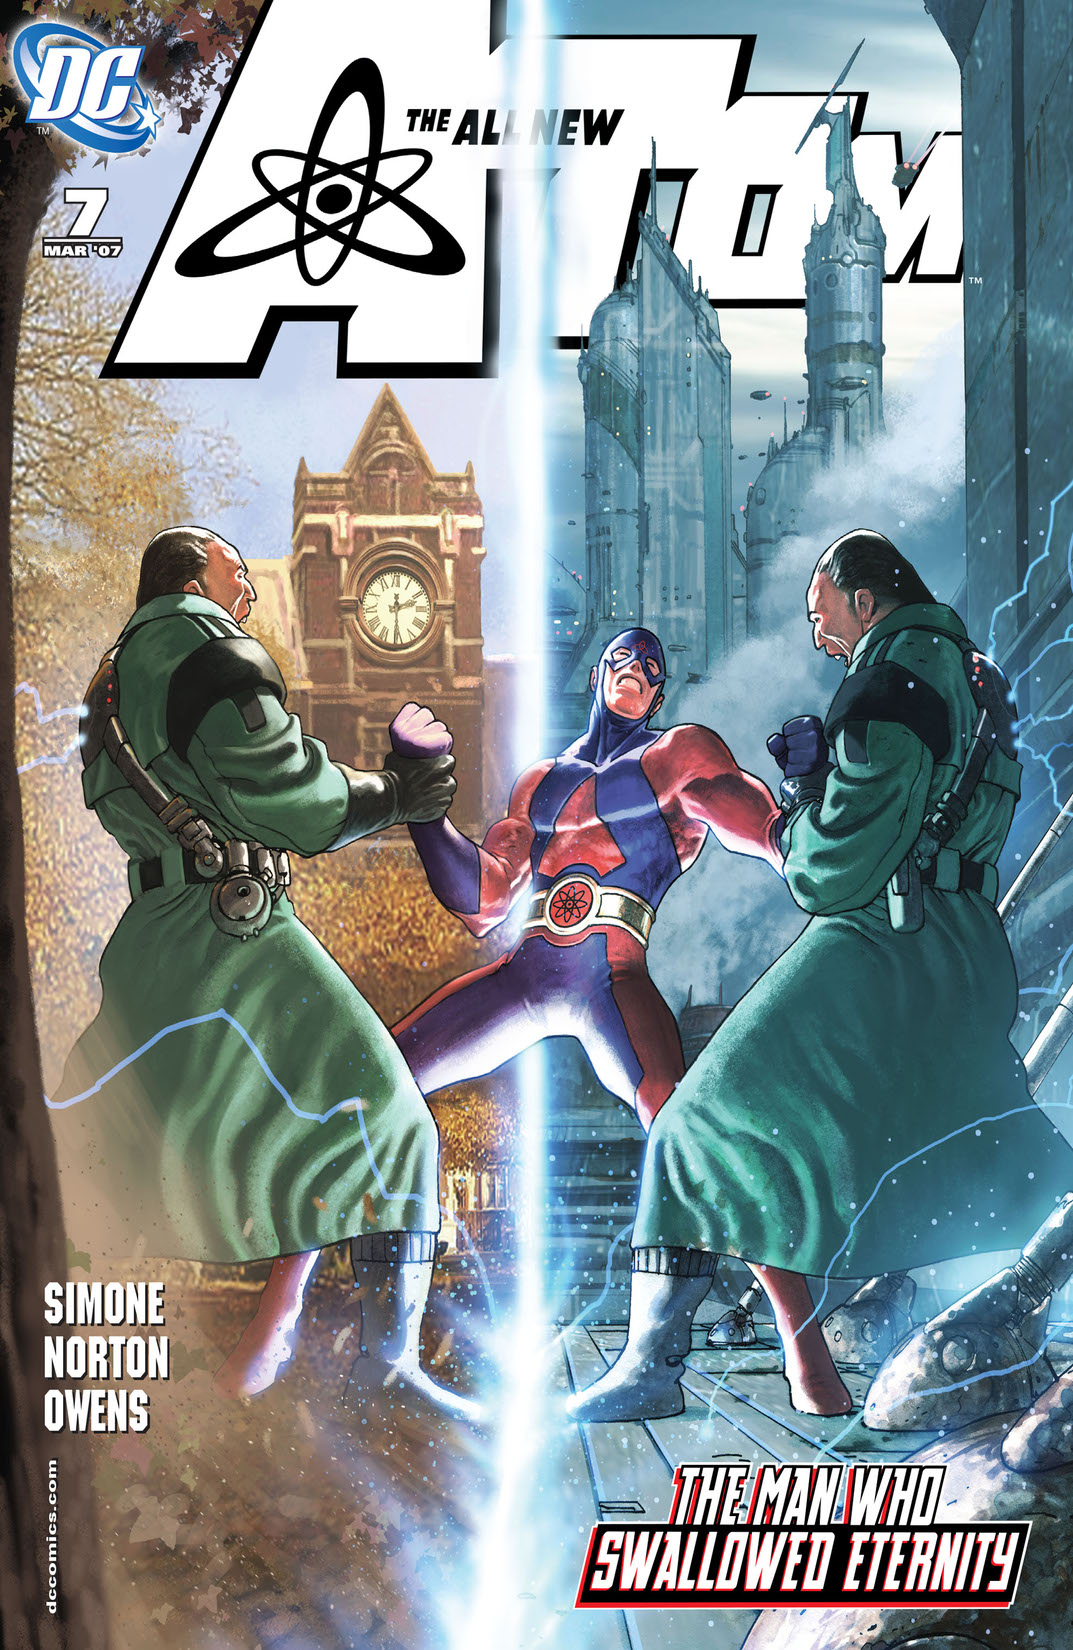 The All New Atom #7 preview images